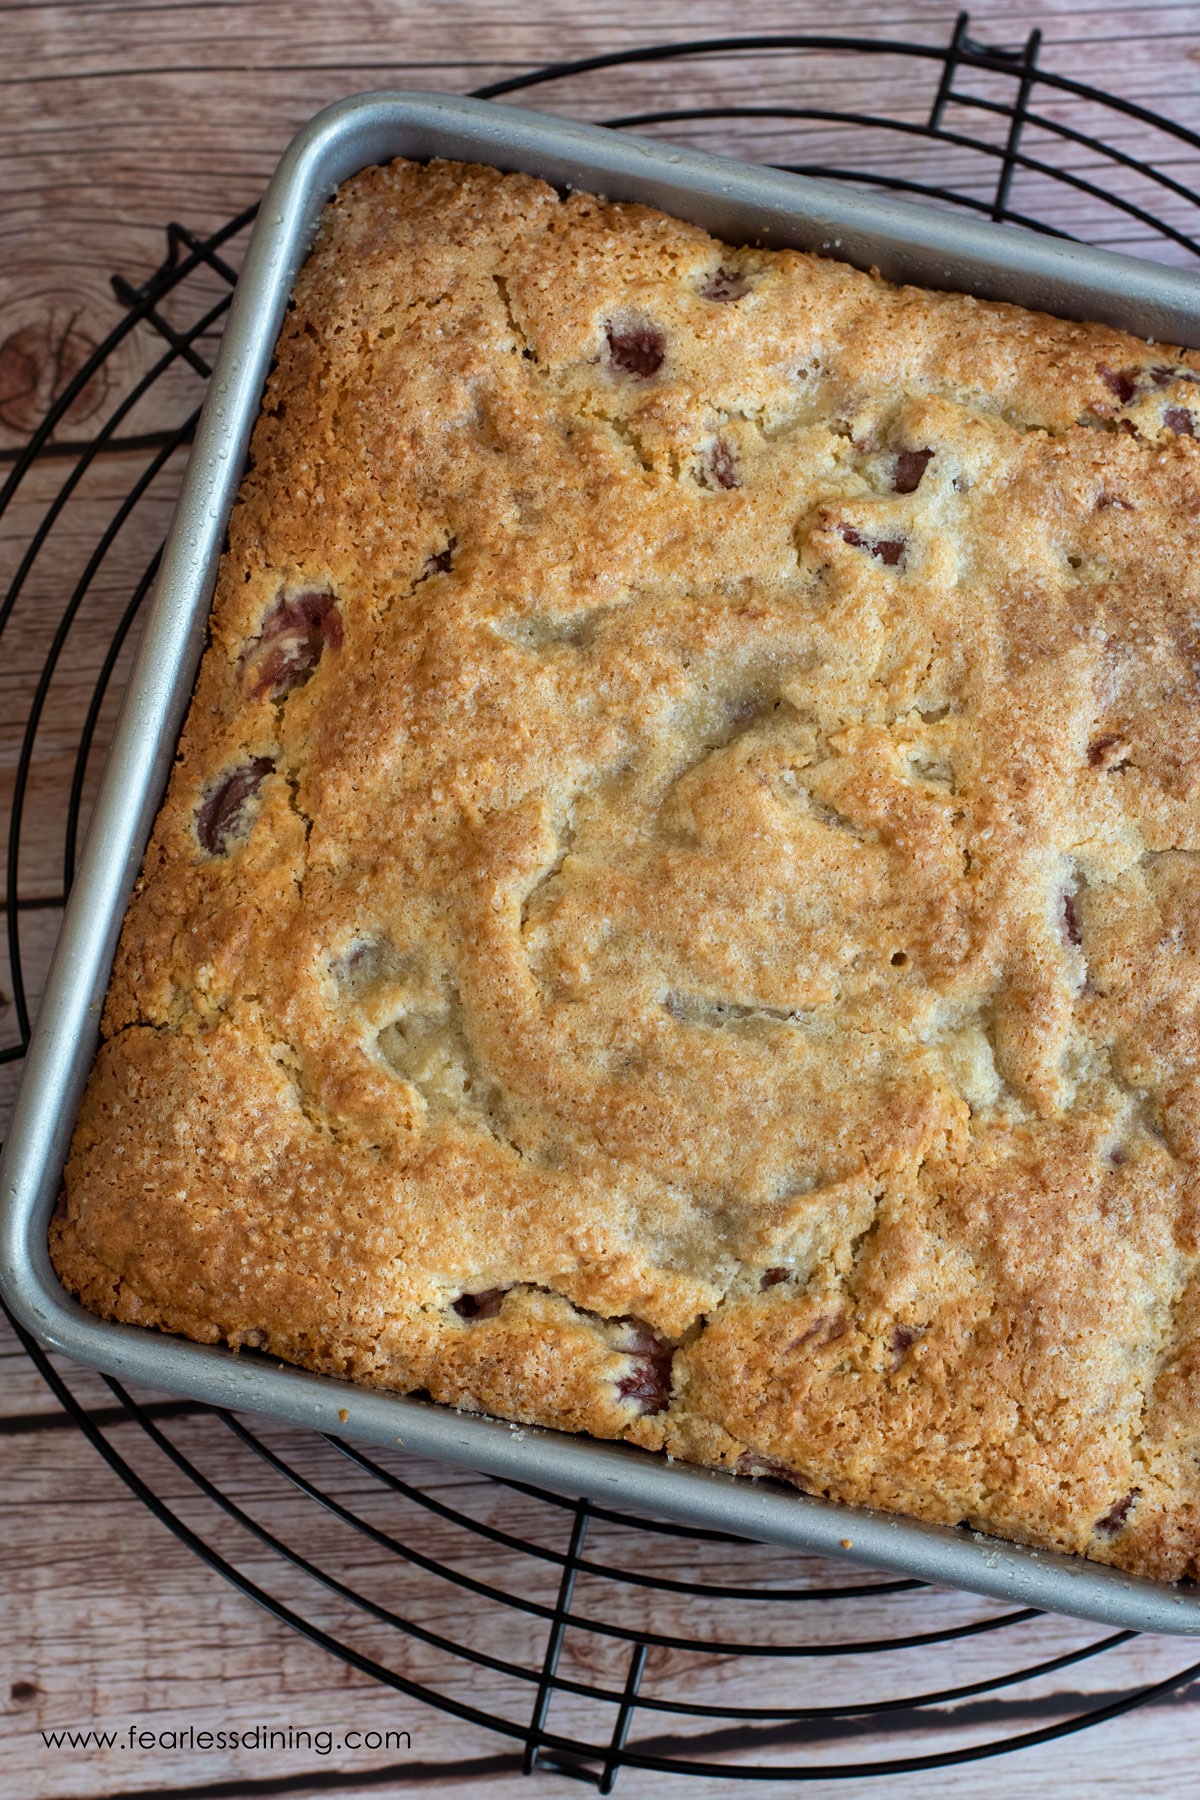 A baked gluten free cherry cake in an 8x8 pan.